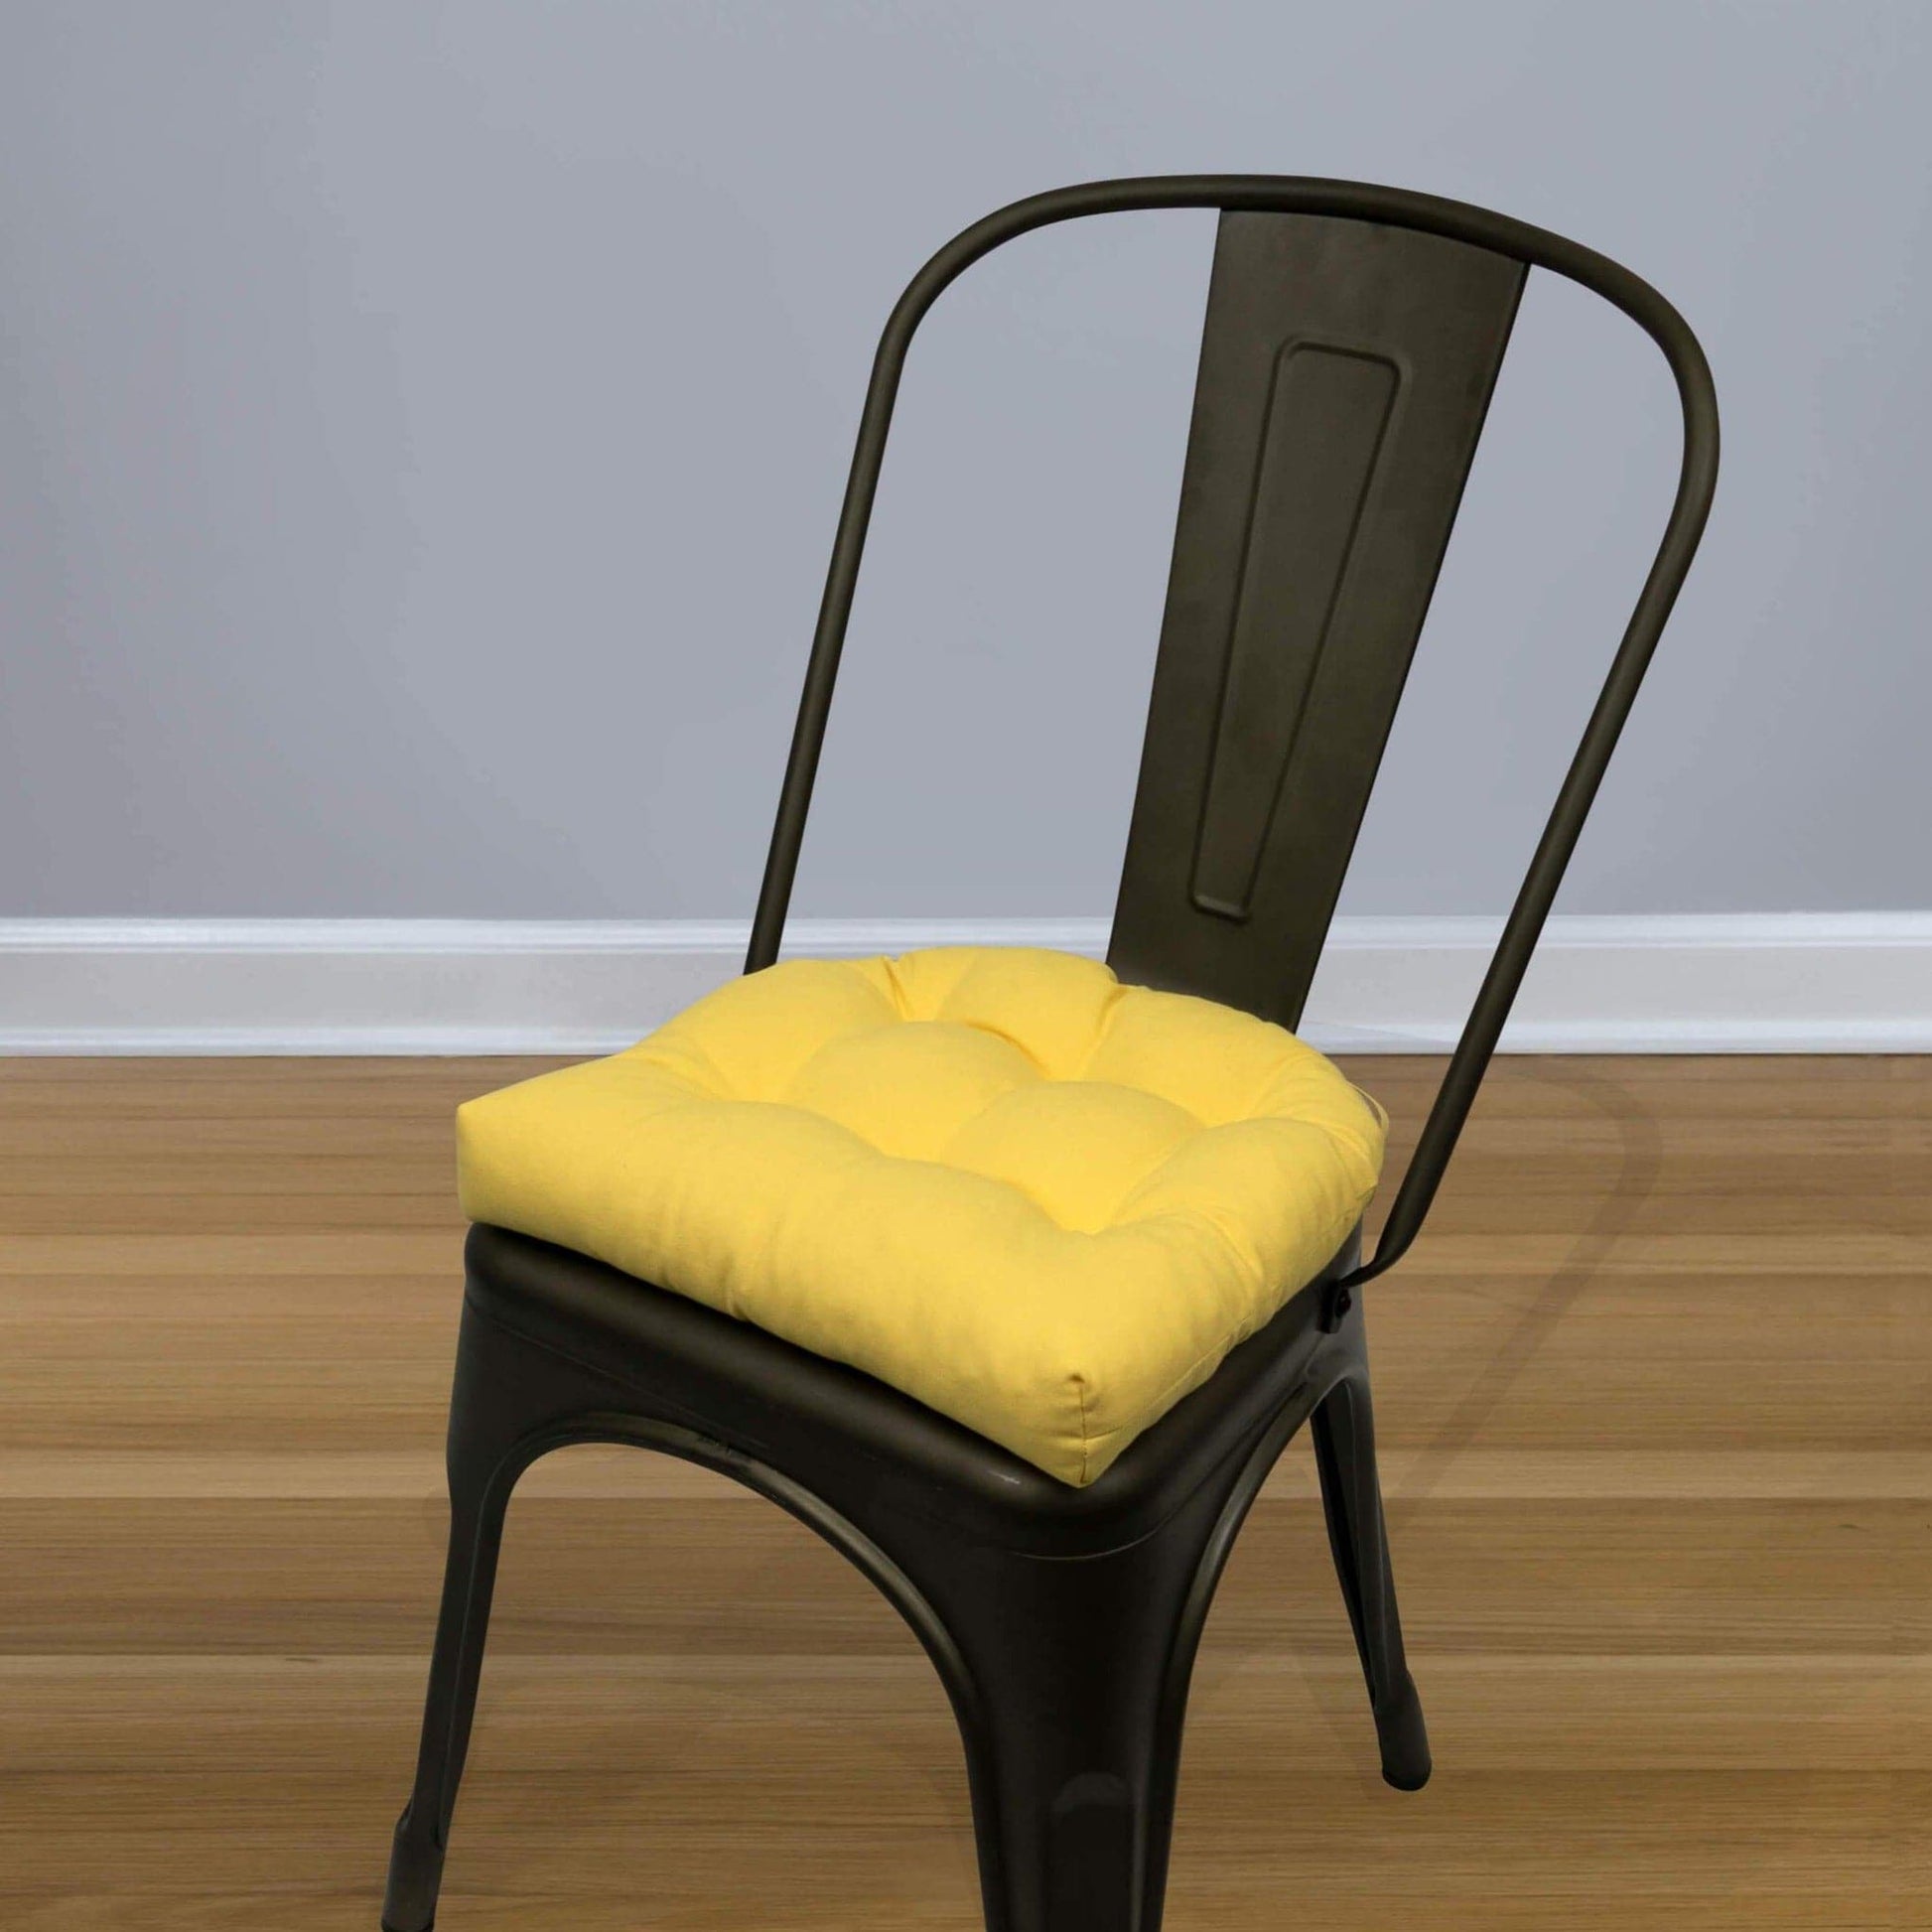 Cotton Duck Yellow Solid Color Dining Chair Pads - Latex Foam Fill